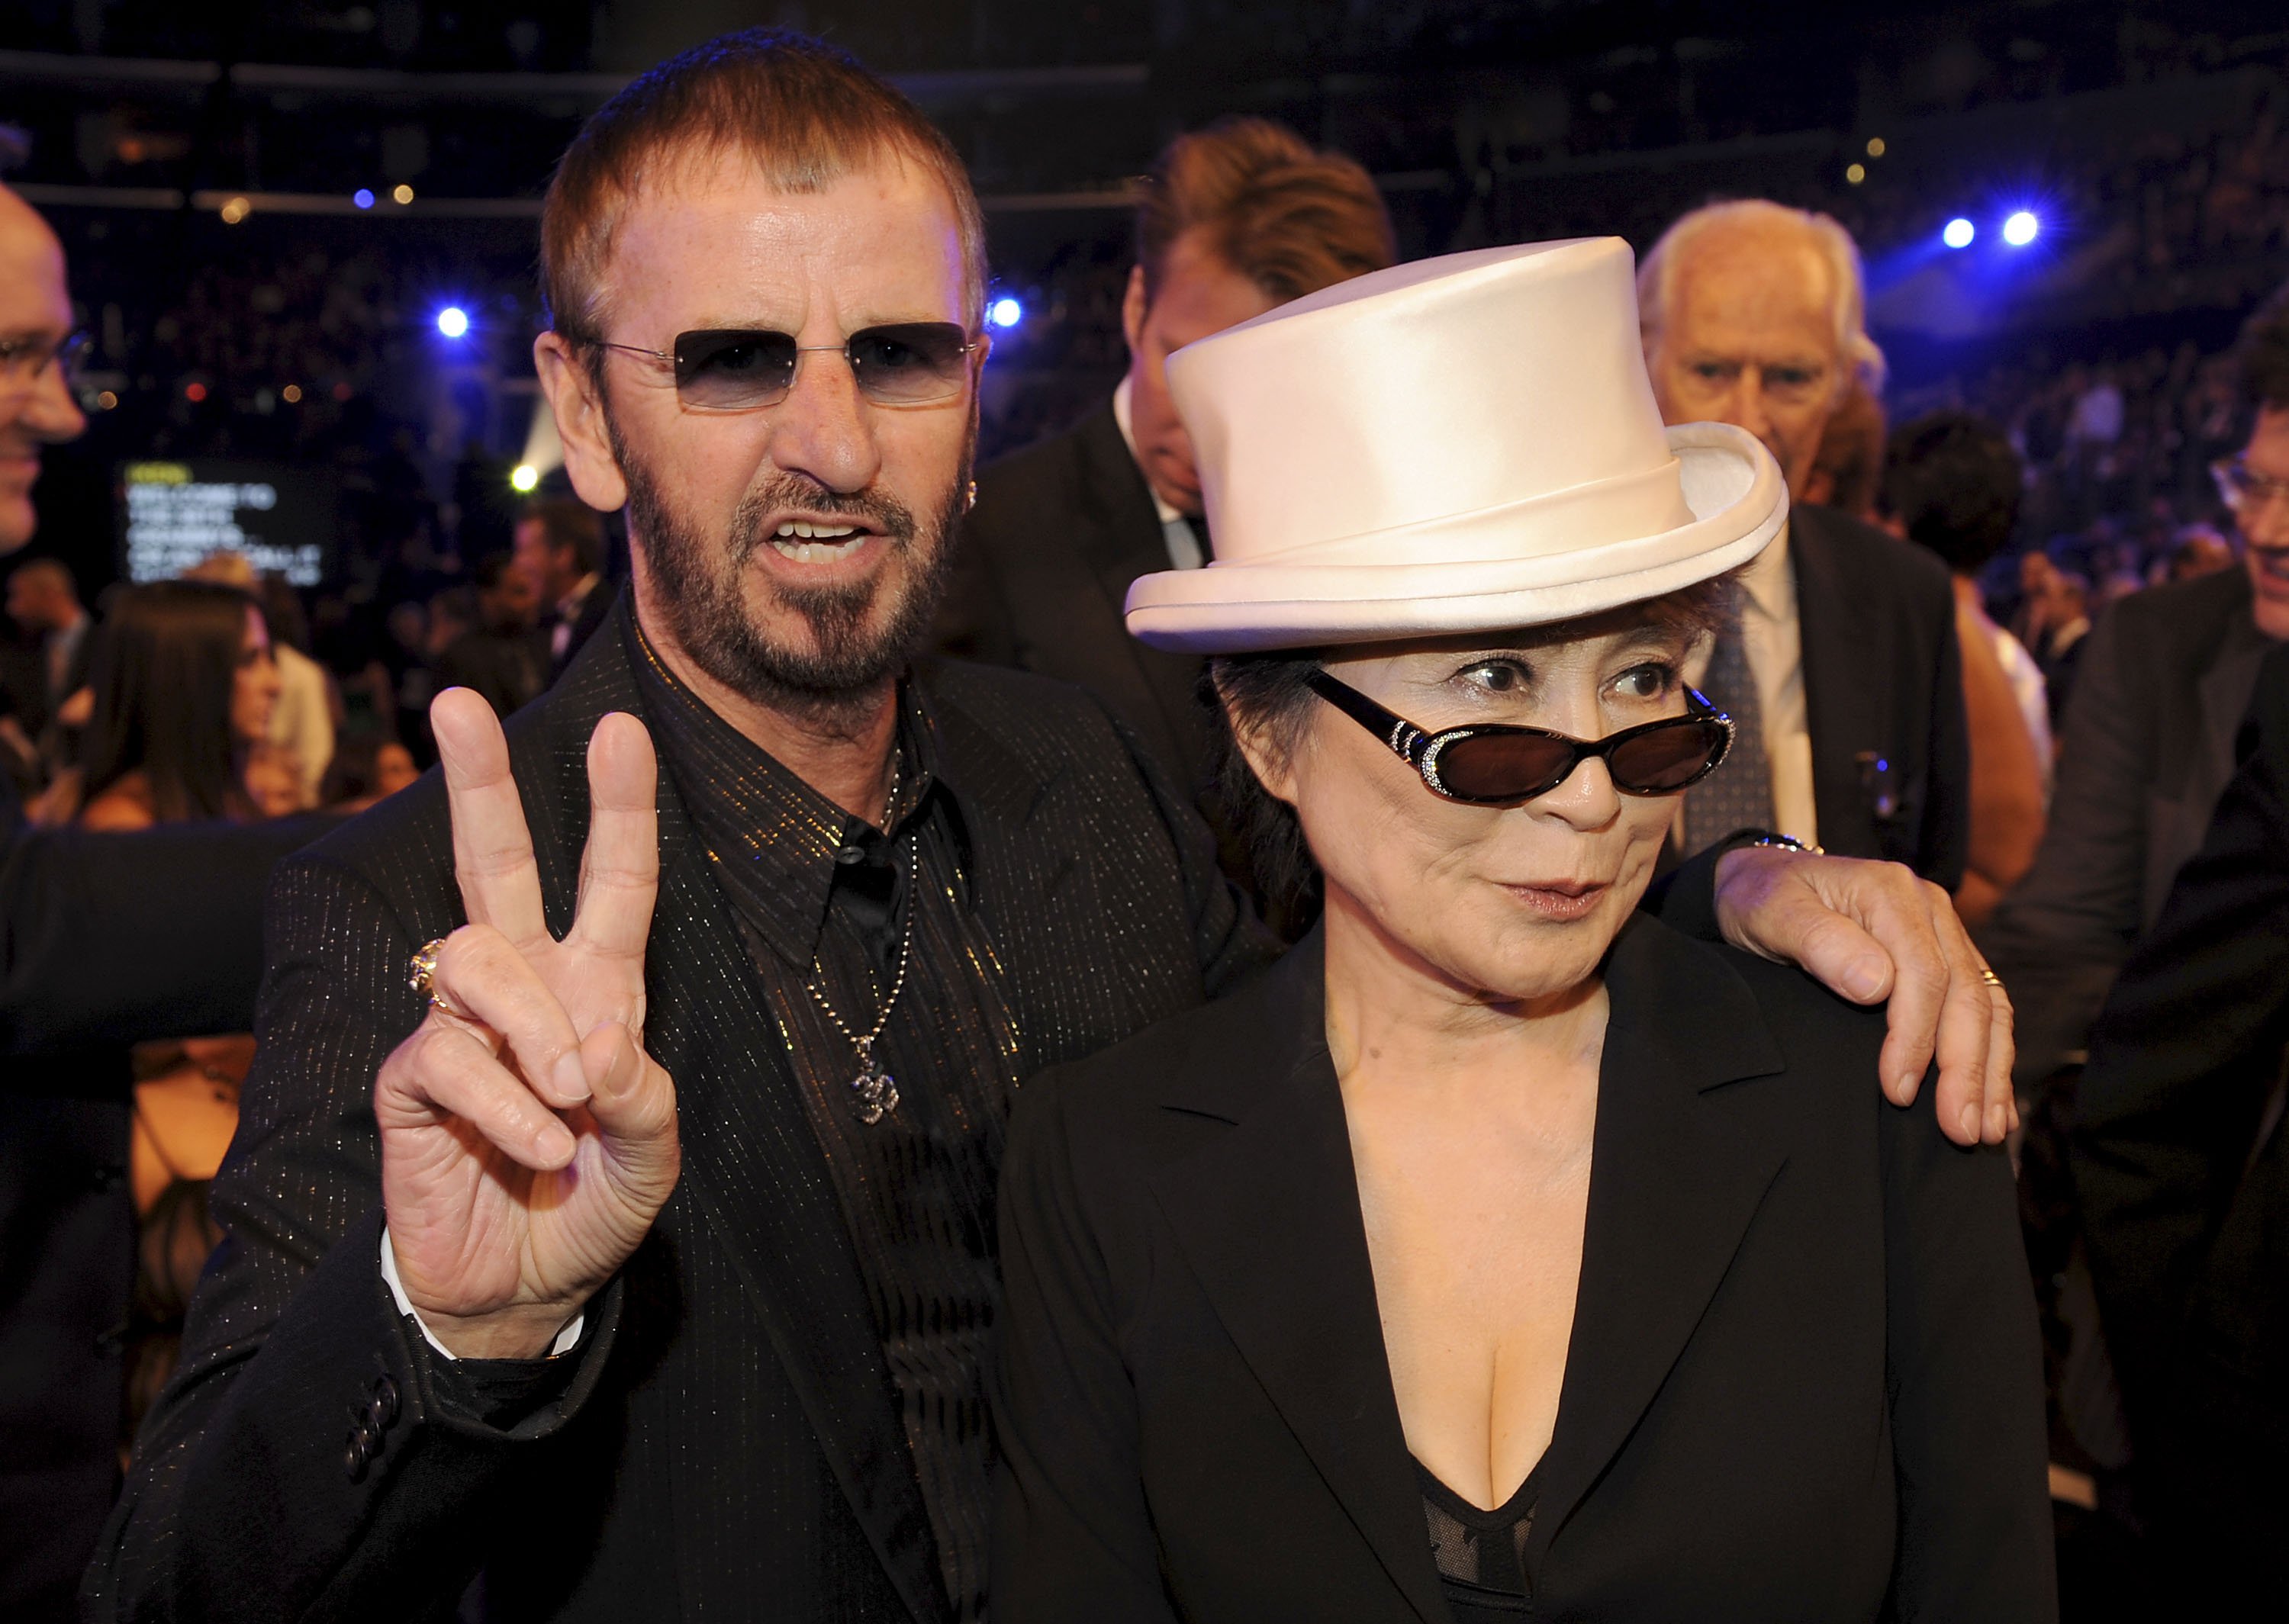 Ringo Starr and Yoko Ono wear black. Starr holds up a peace sign.